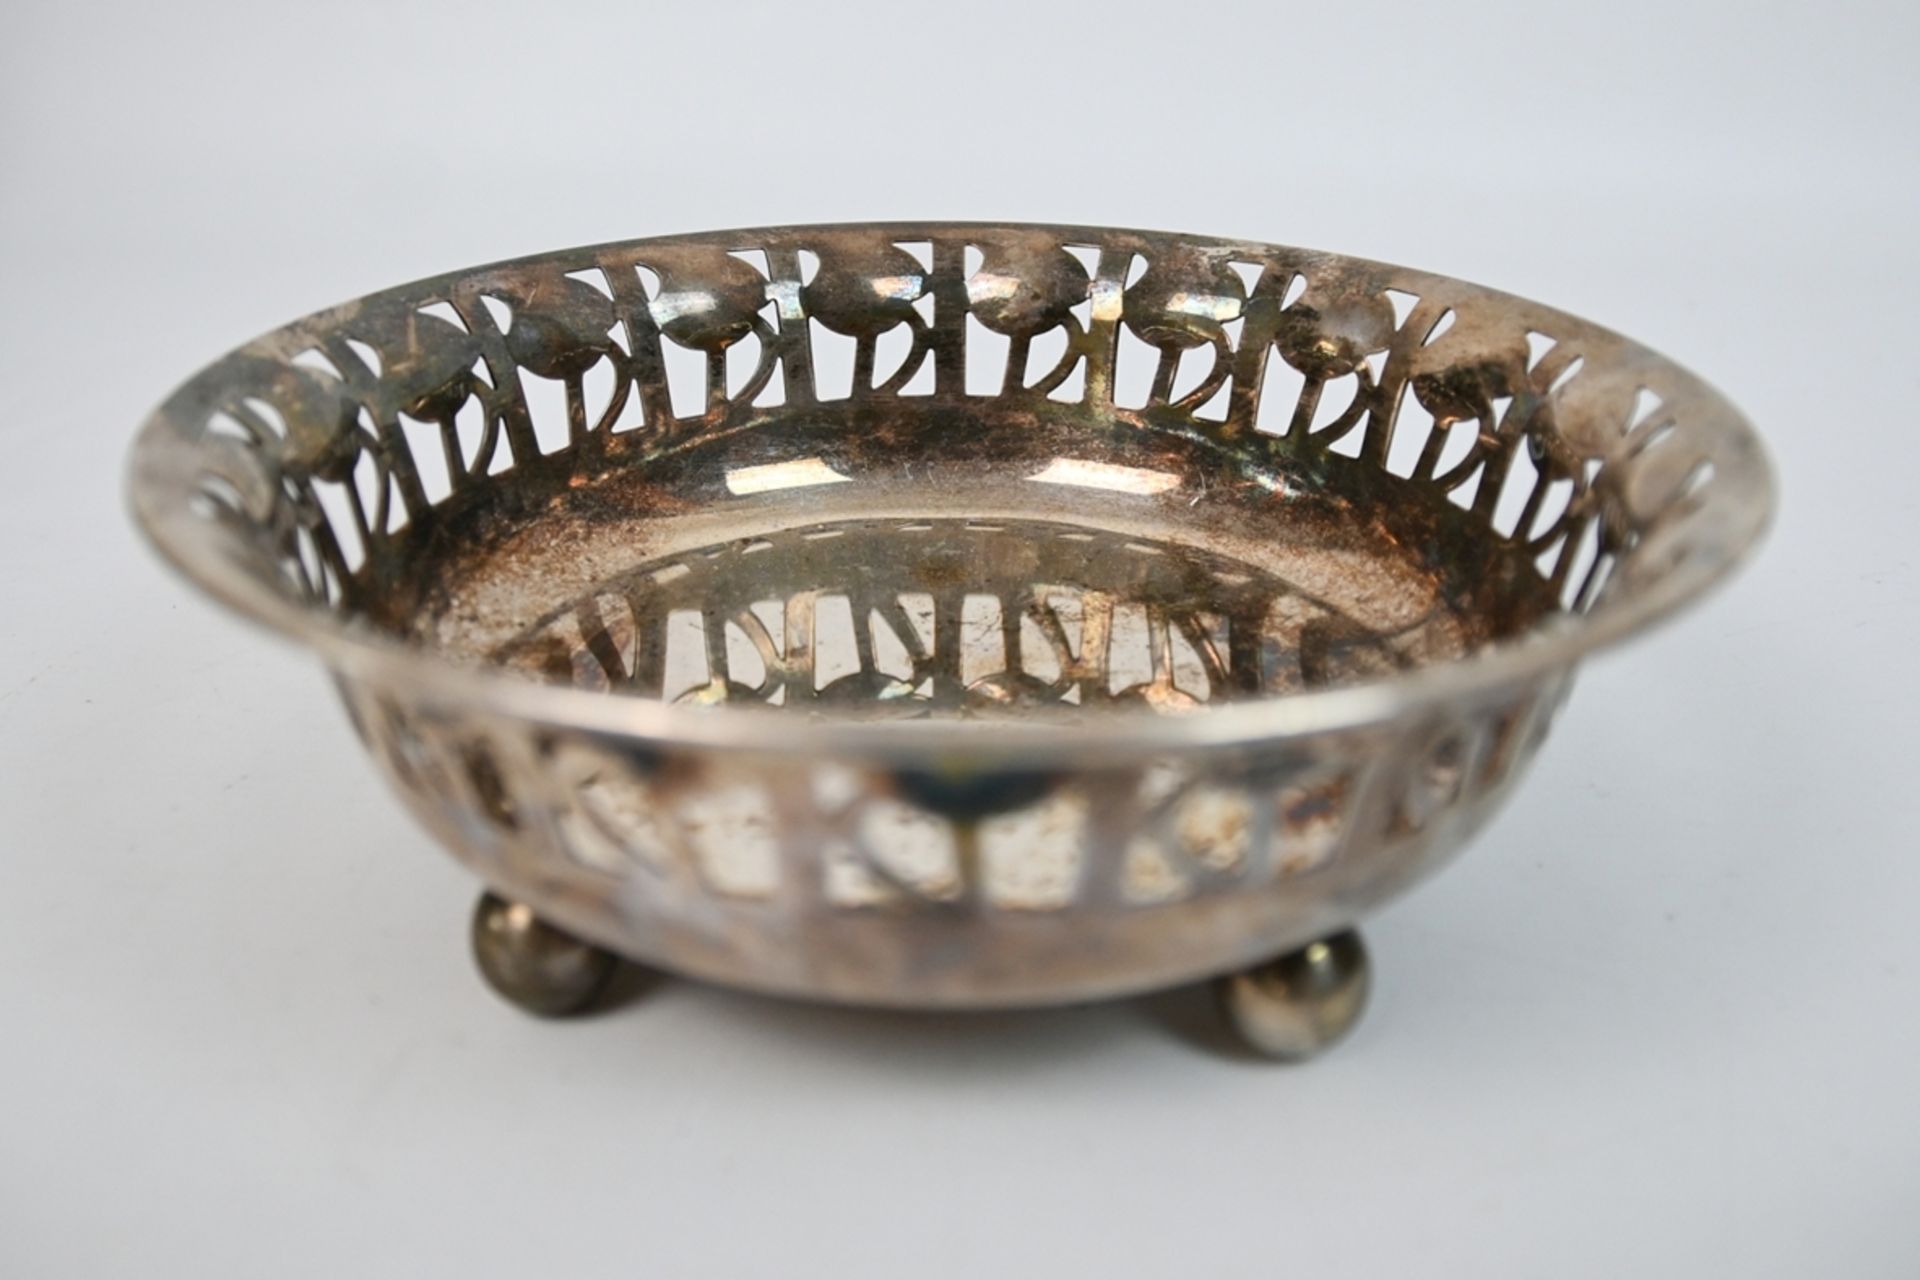 Alessi rose bowl, silver-plated, marked on the outside of the side with the hallmark "Officina Ales